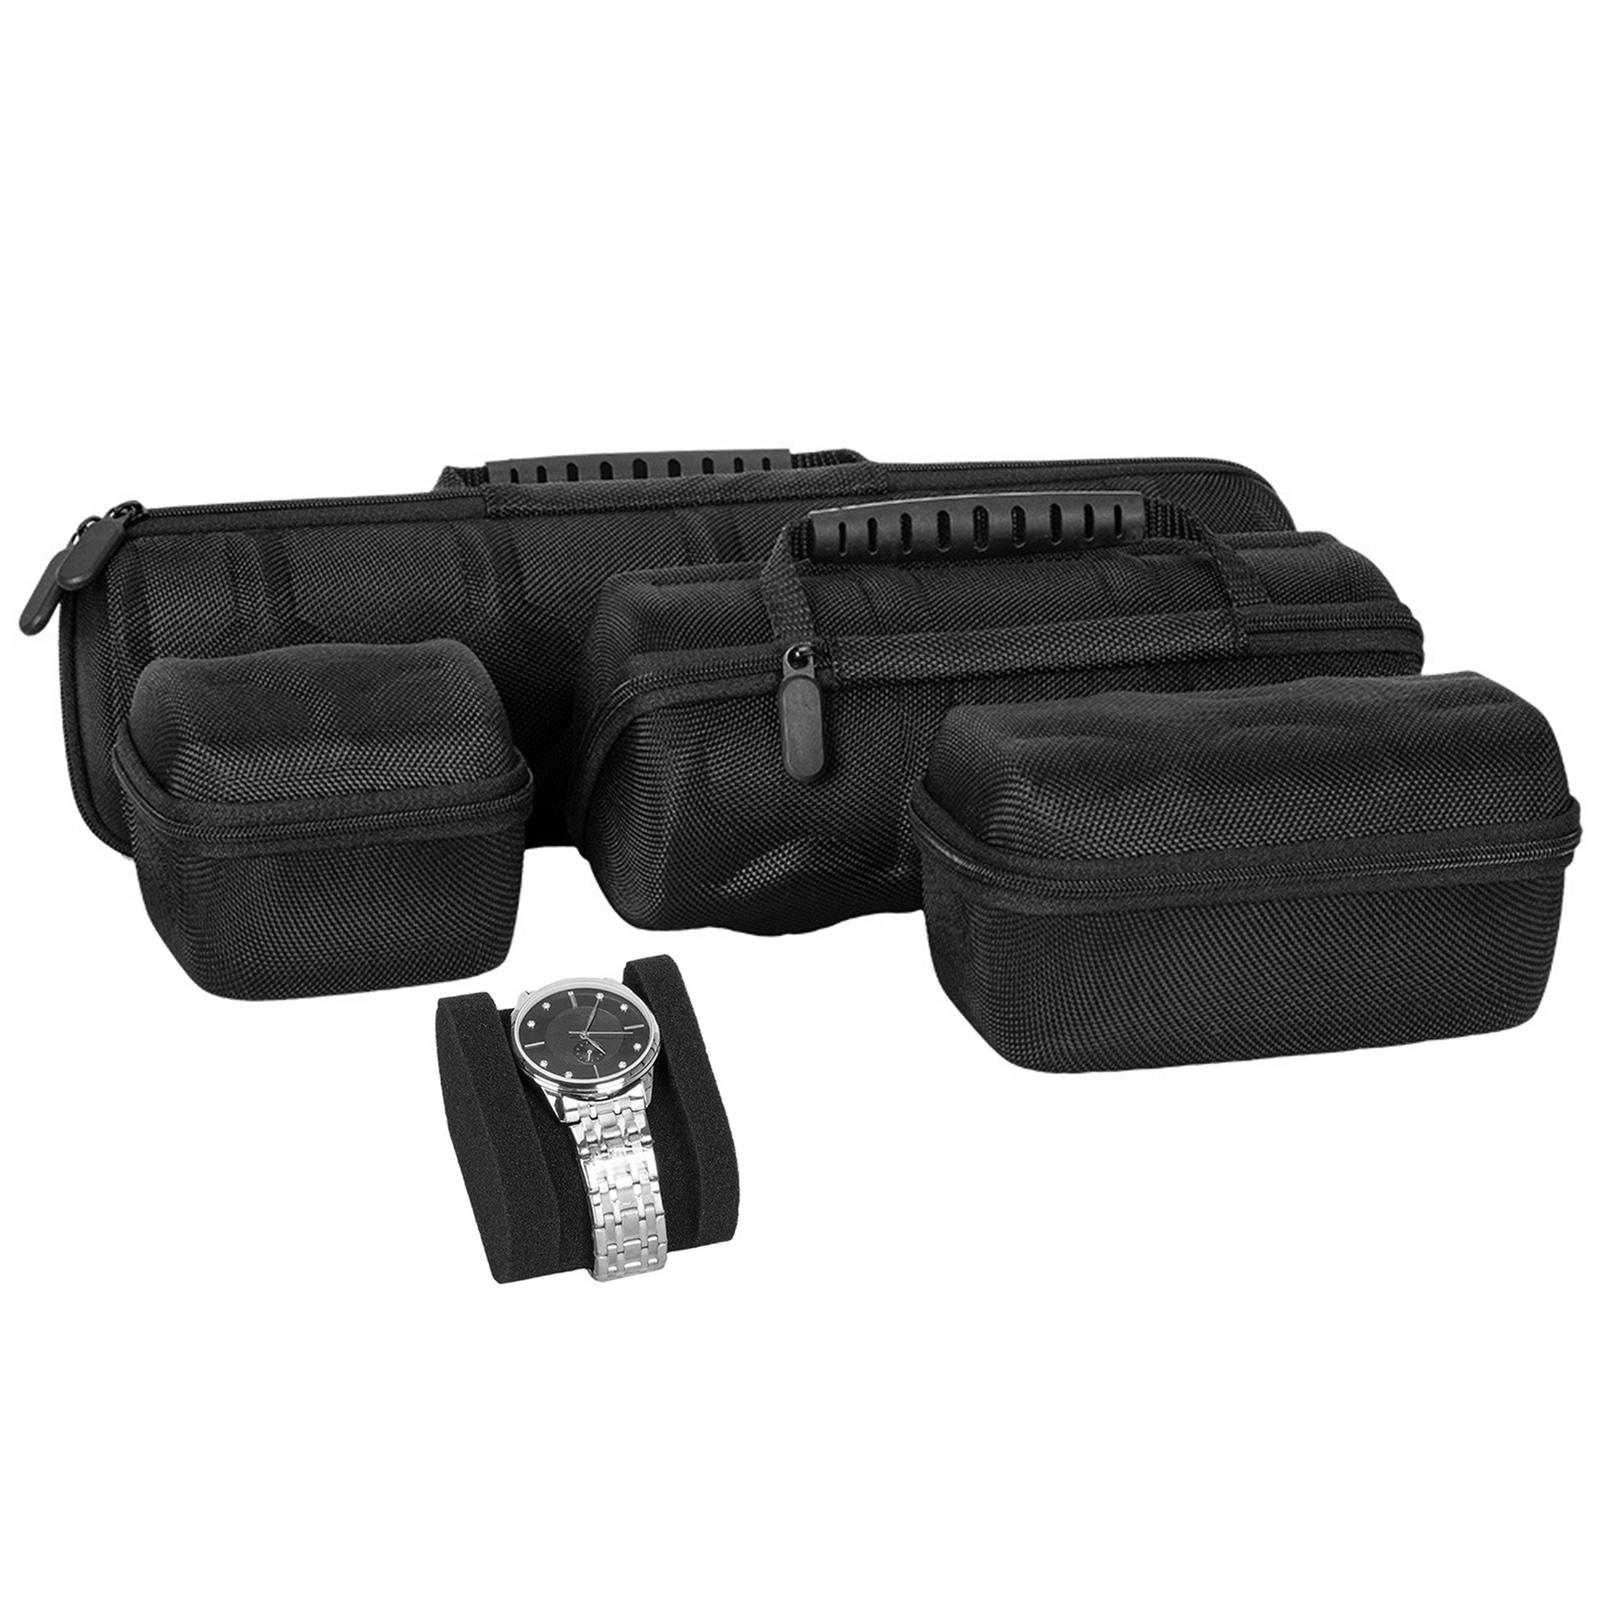 Megawheels Travel Watch Case for Large Watches